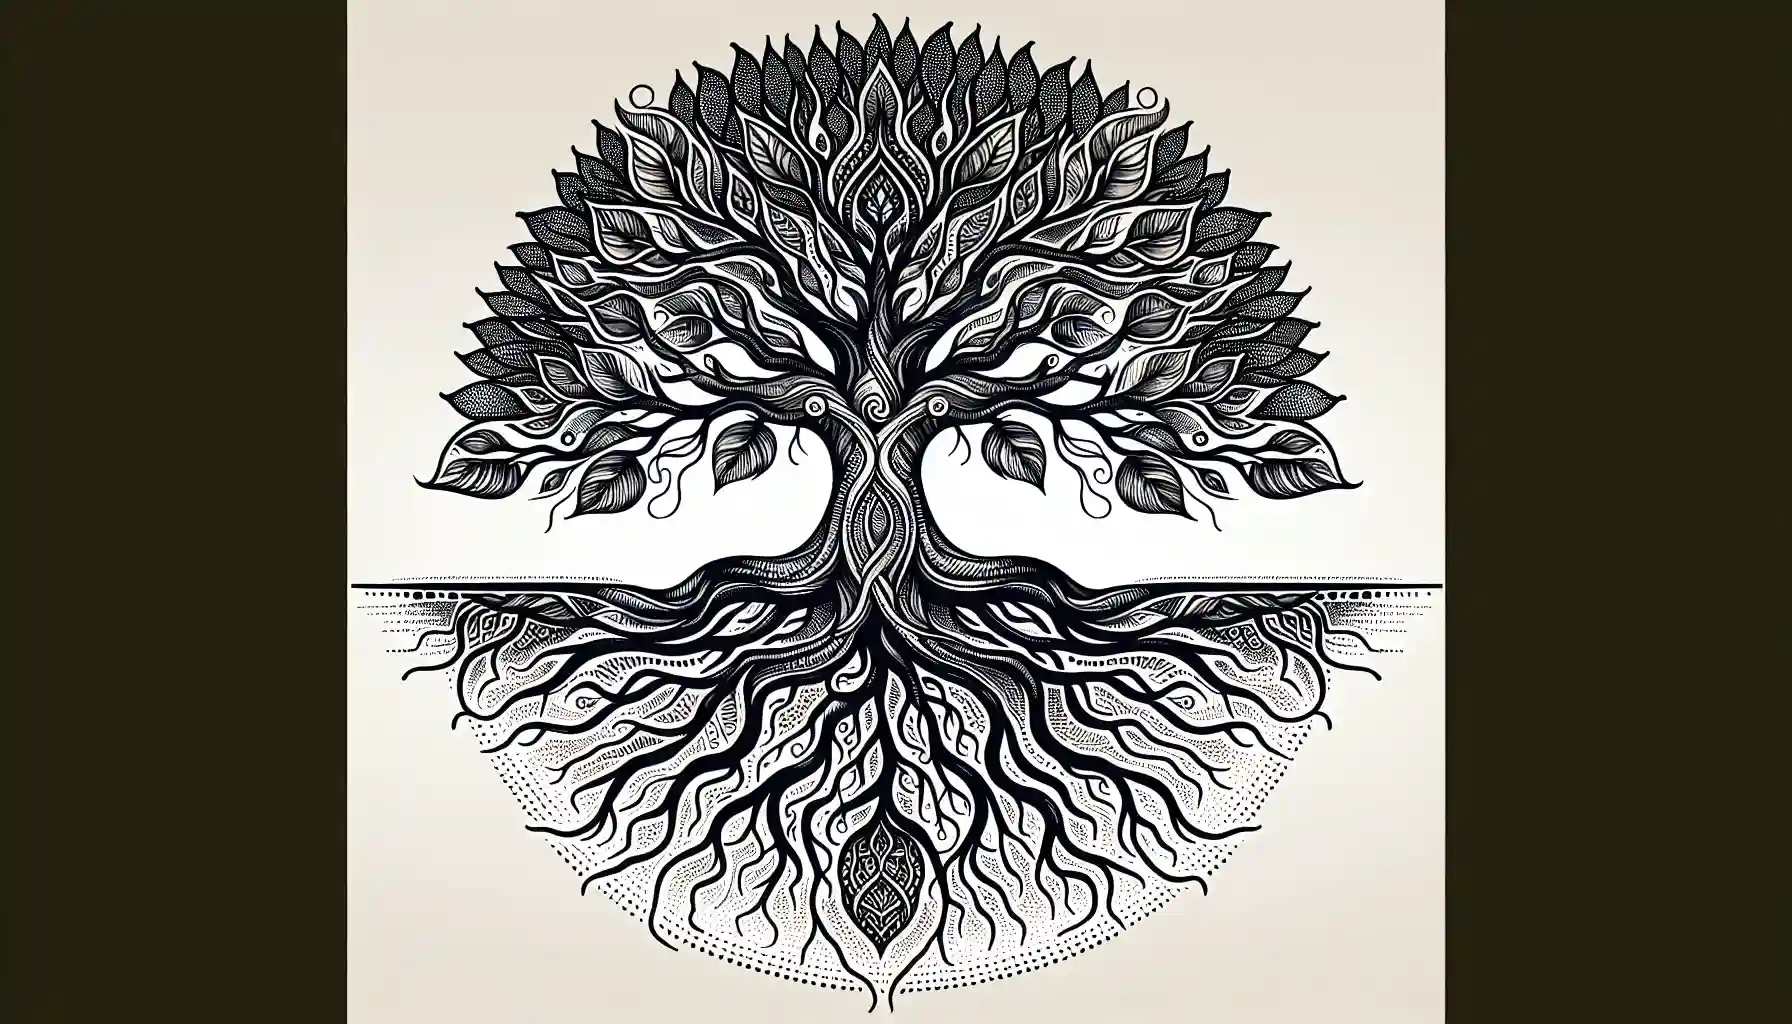 What is the Meaning of the Tree of Life Tattoo?